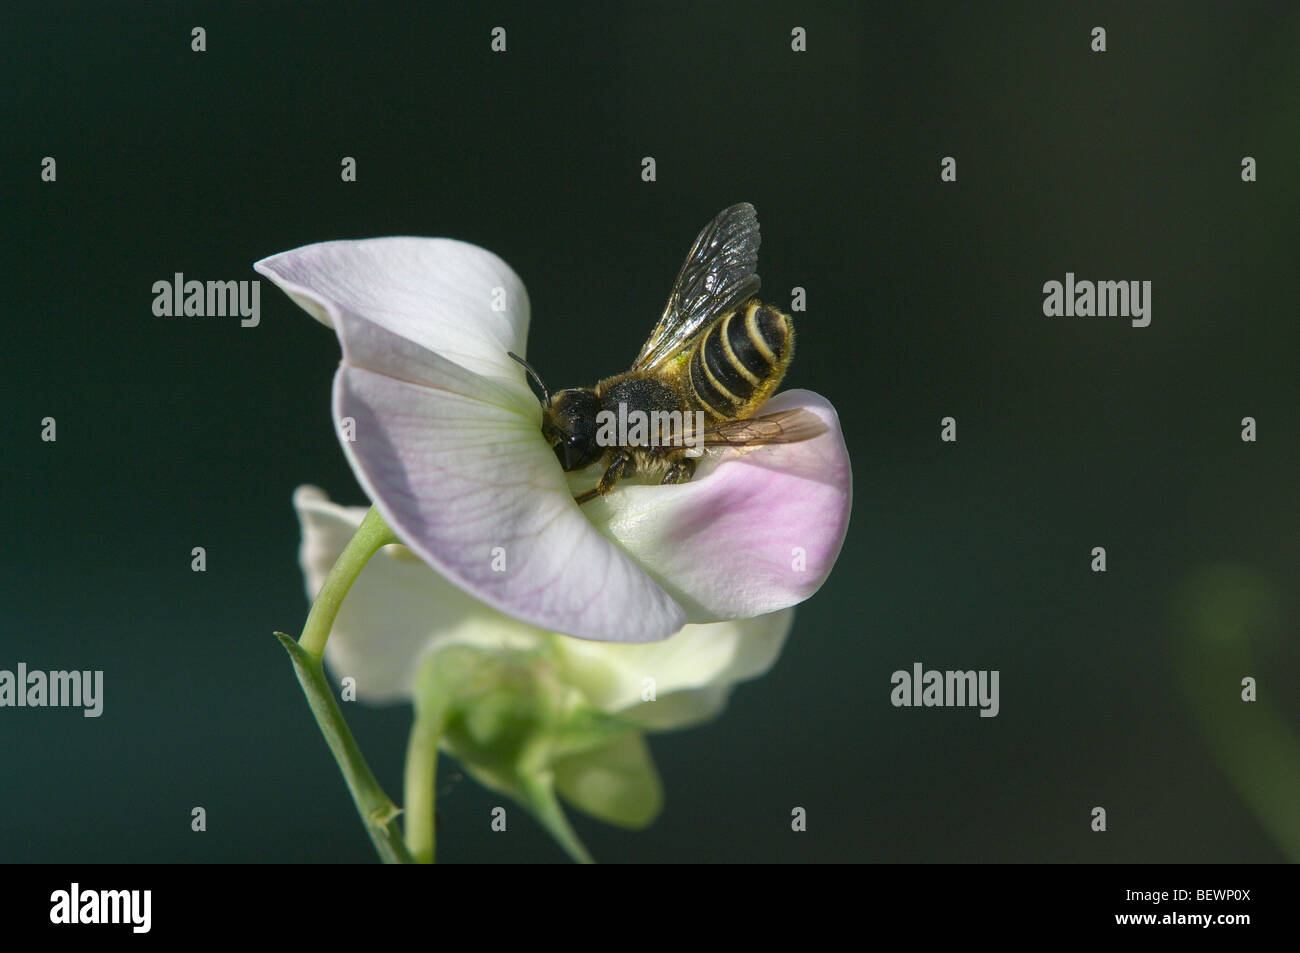 European honeybee forcing its way into perennial sweet pea flower Stock Photo